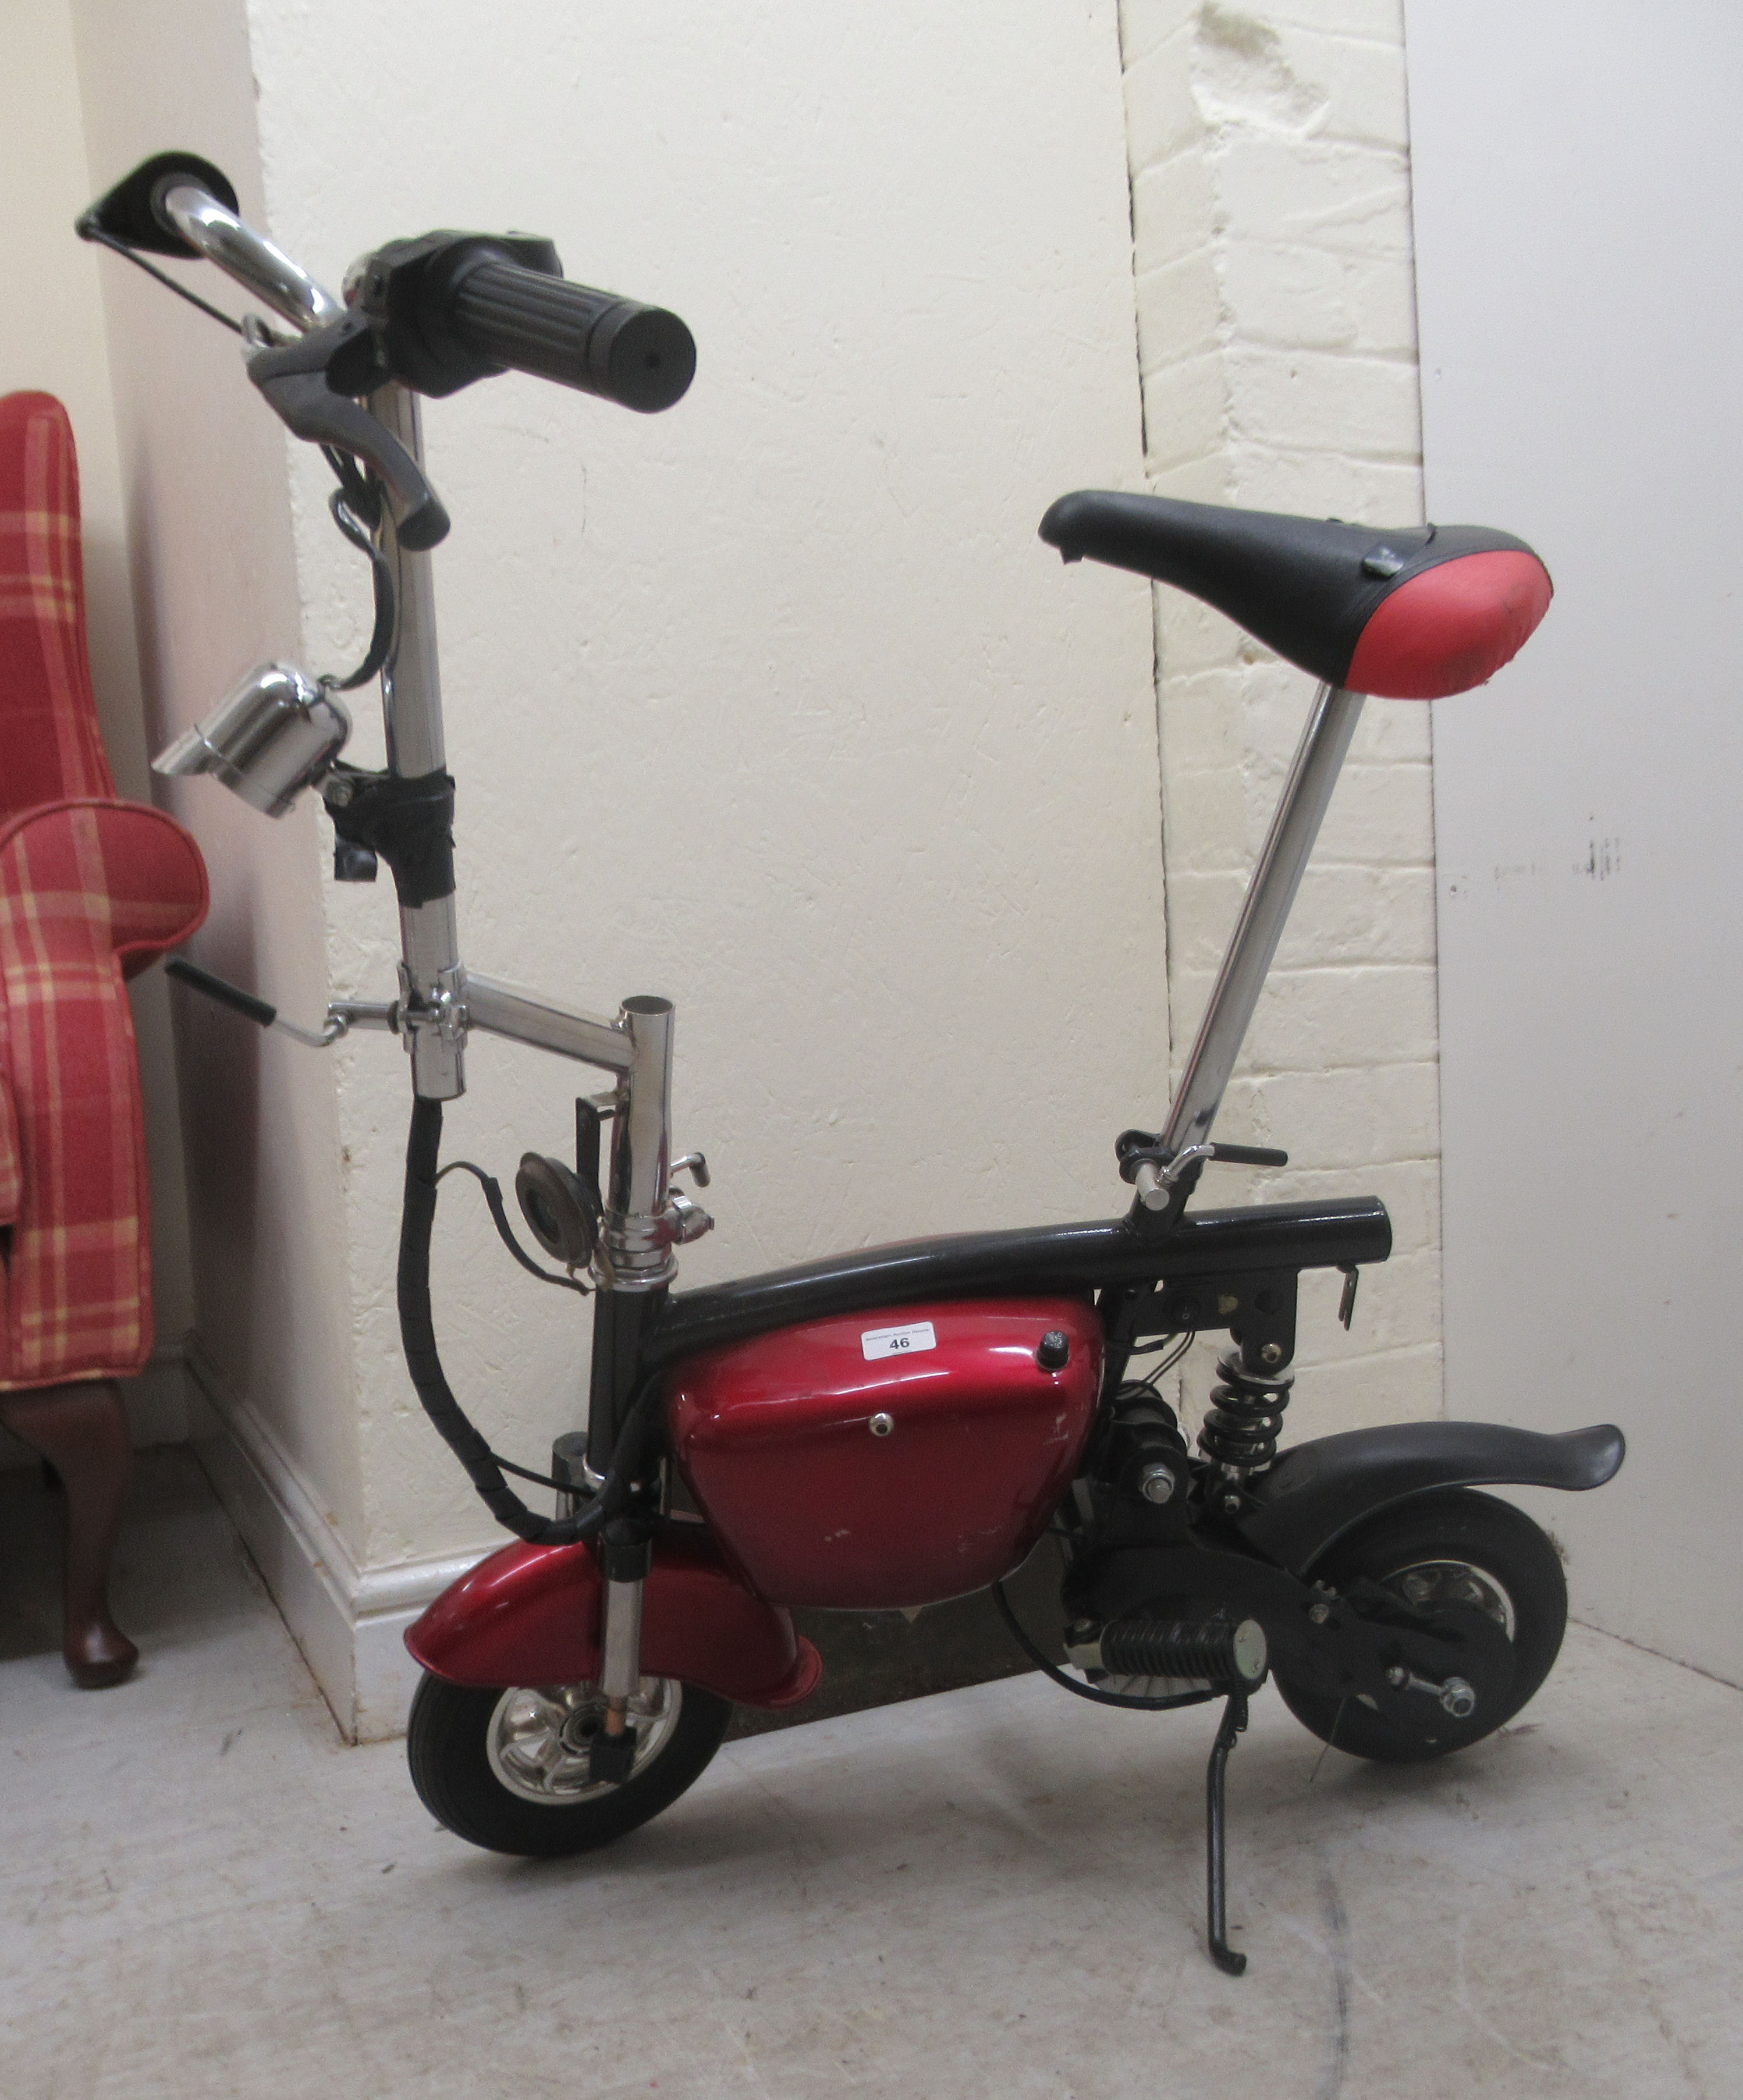 A modern battery powered bicycle with red livery and 8"wheels